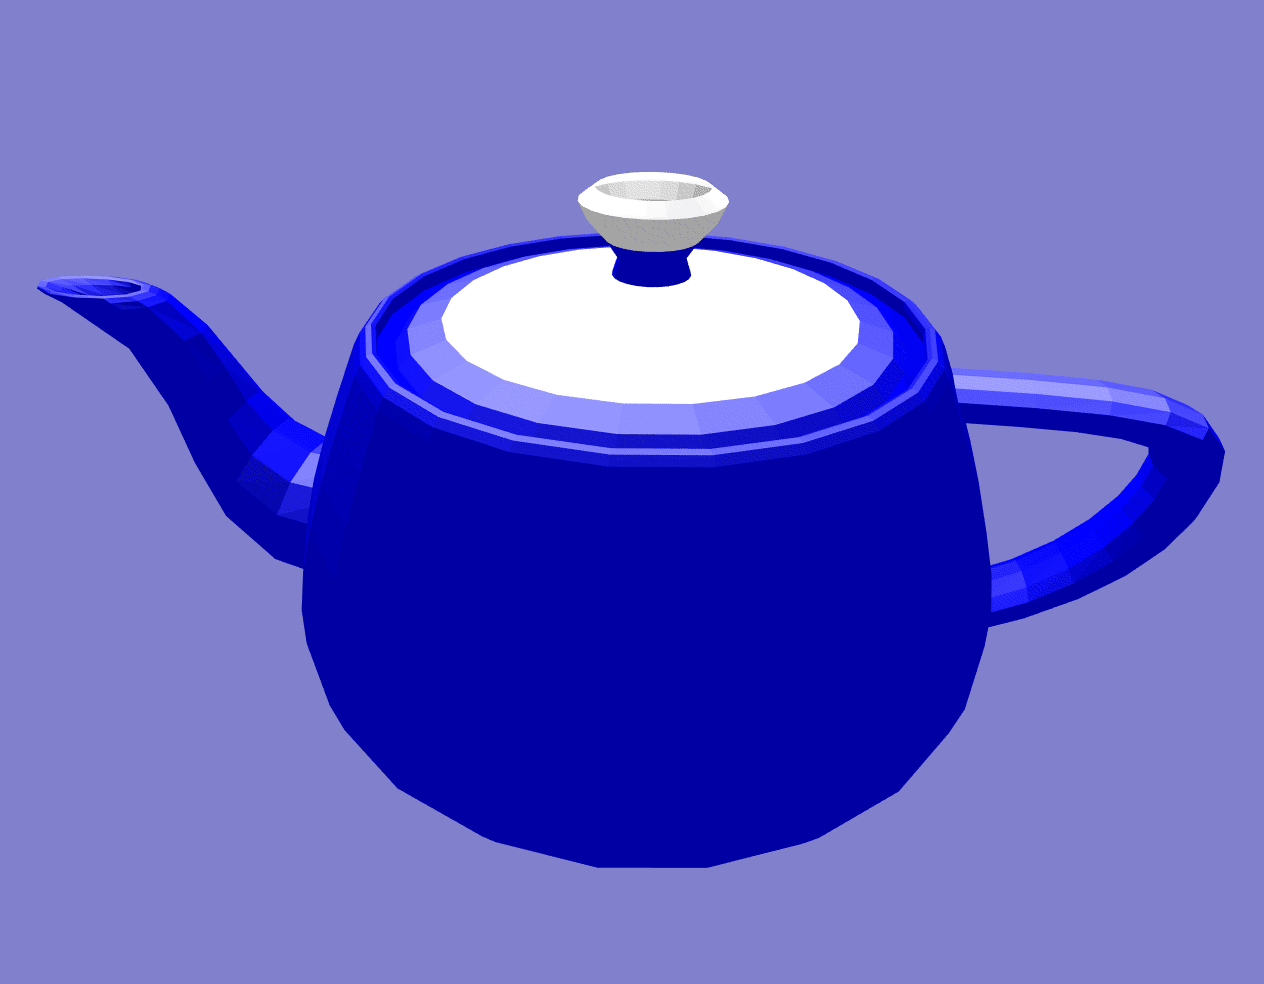 The Famous Teapot in DXF Form